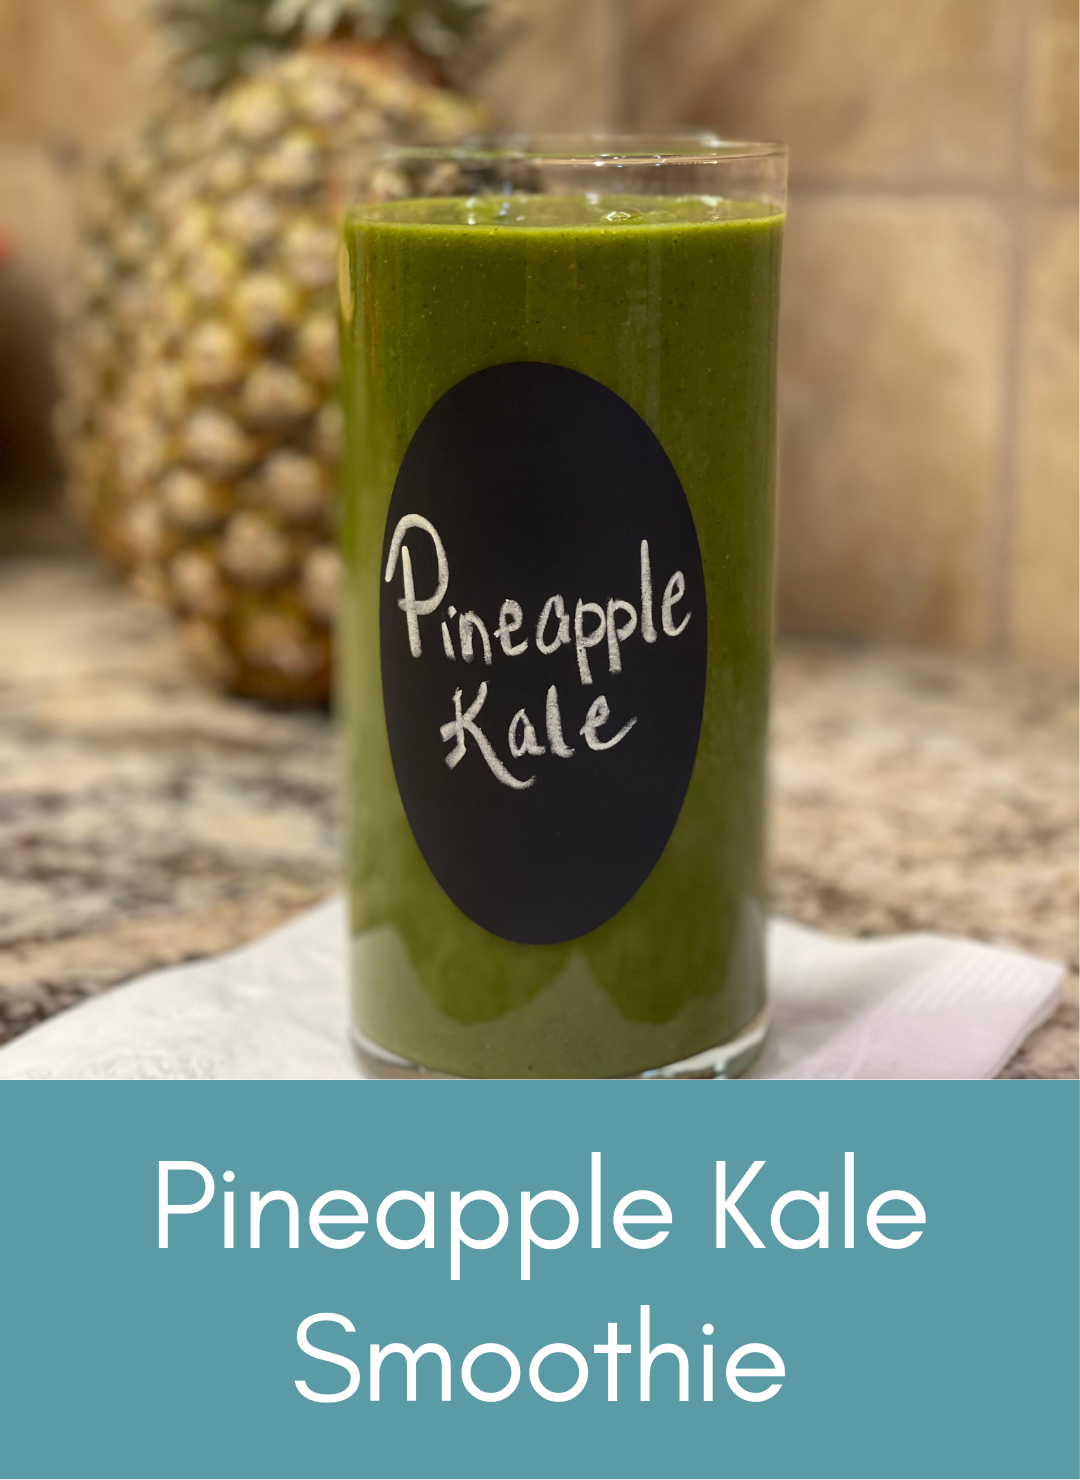 Pineapple Kale protein vegan smoothie Picture with link to recipe